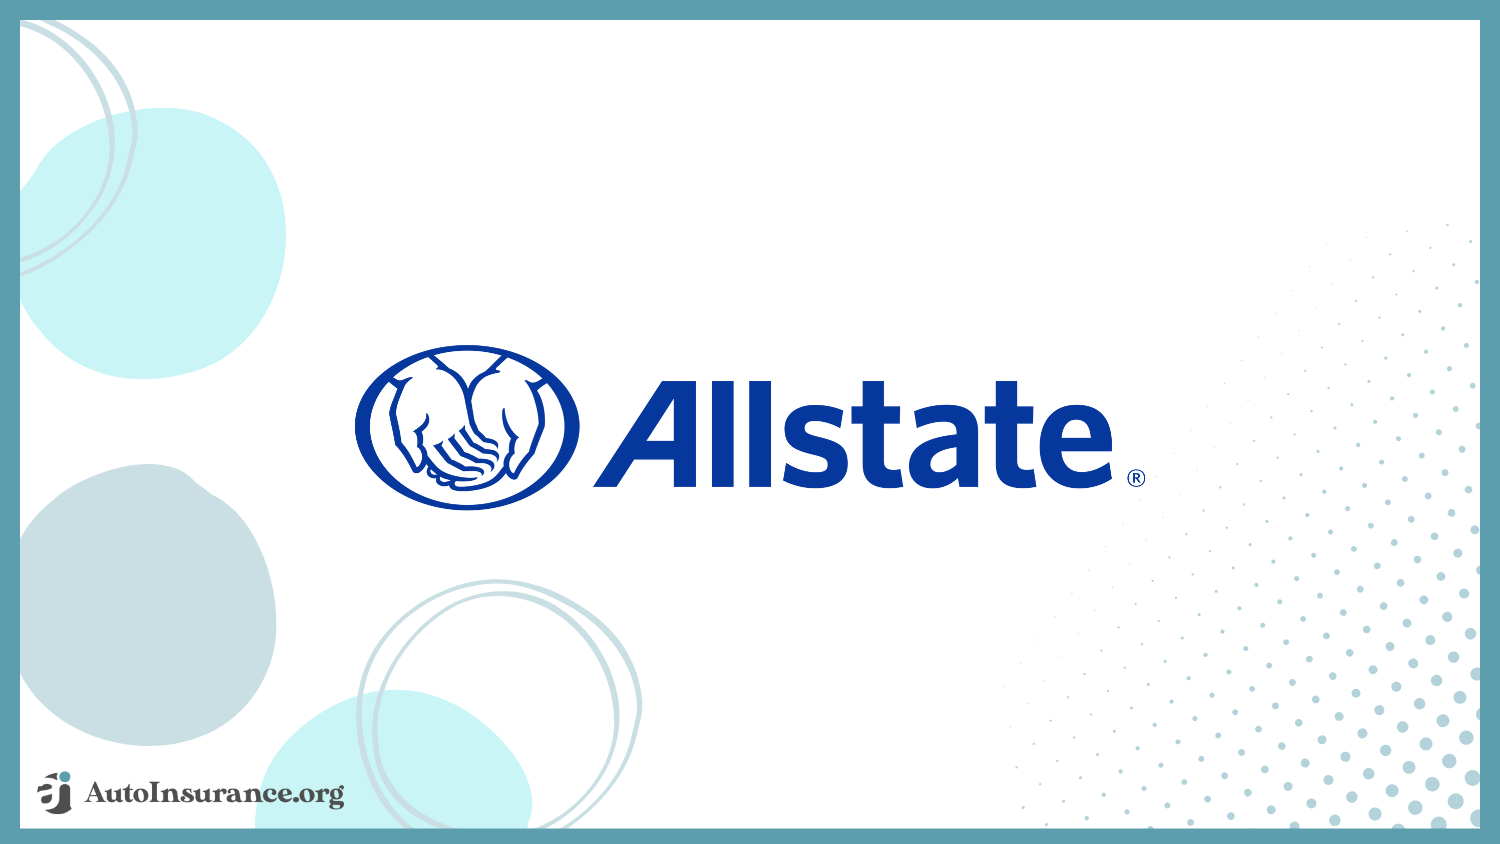 allstate: Best Pay-As-You-Go Auto Insurance in Texas